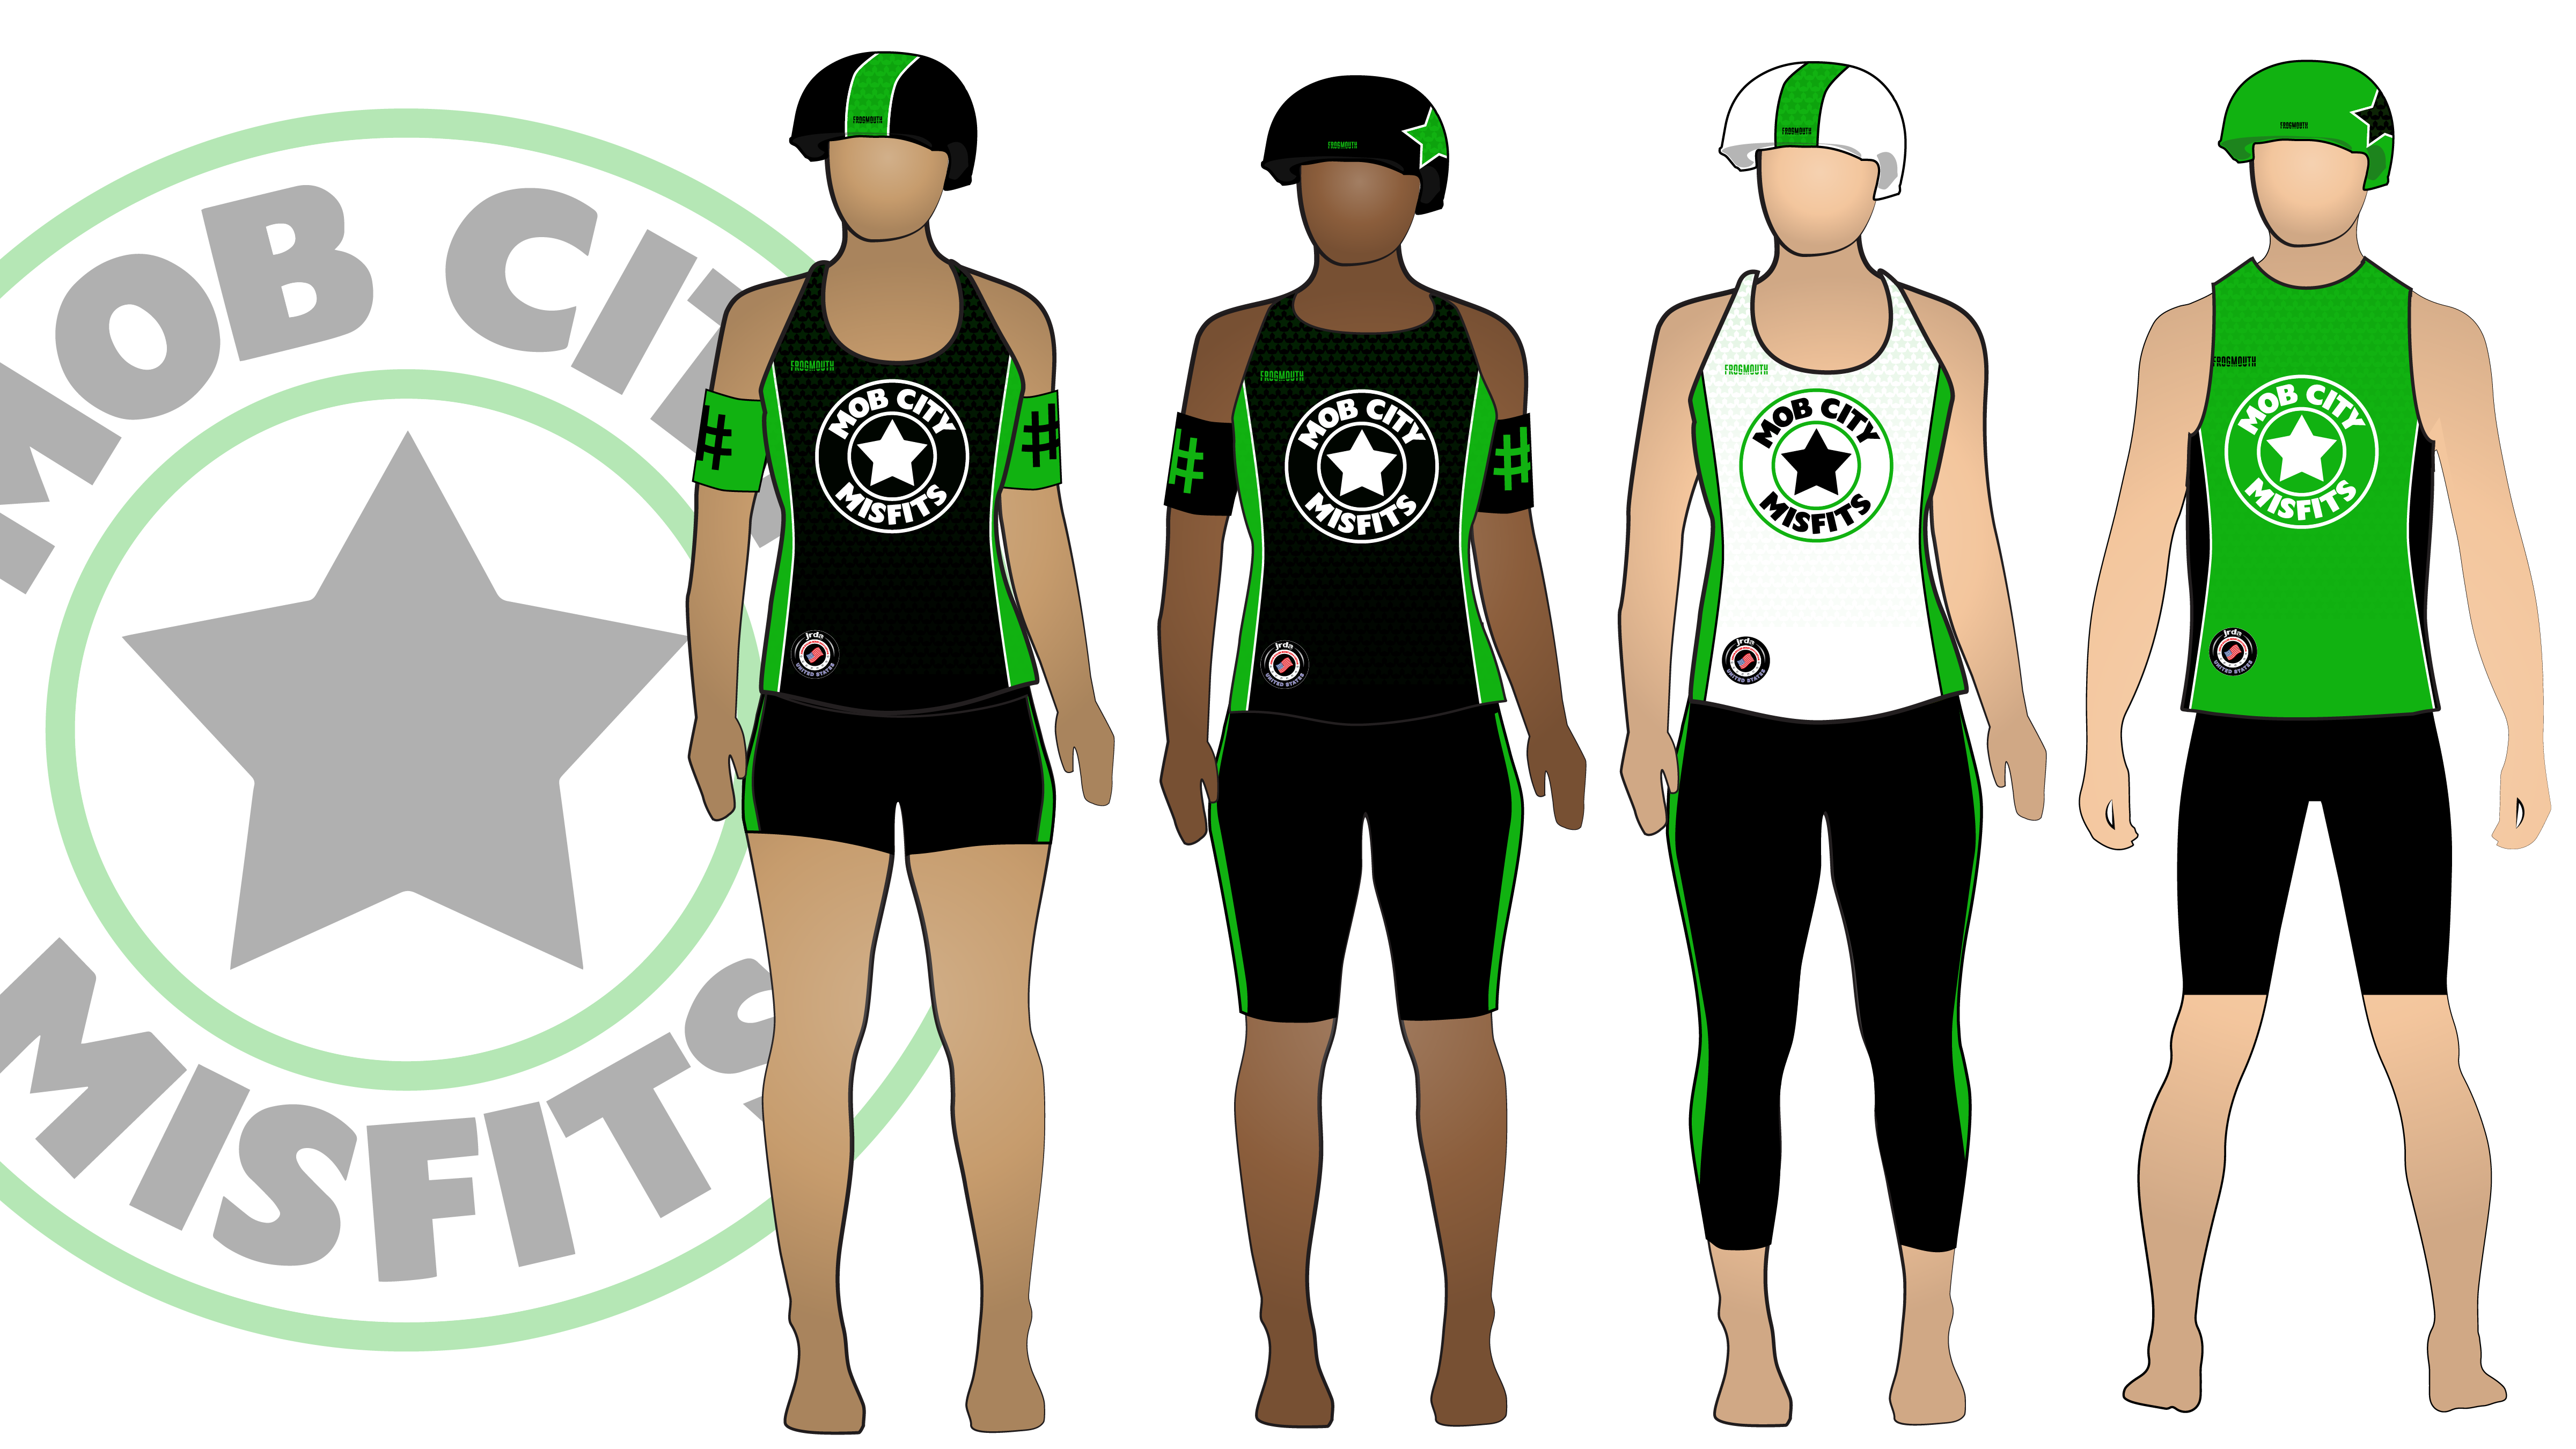 Mob City Misfits Roller Derby Uniforms | Custom Roller Derby Uniforms by Frogmouth | Custom Roller Derby Jerseys by Frogmouth